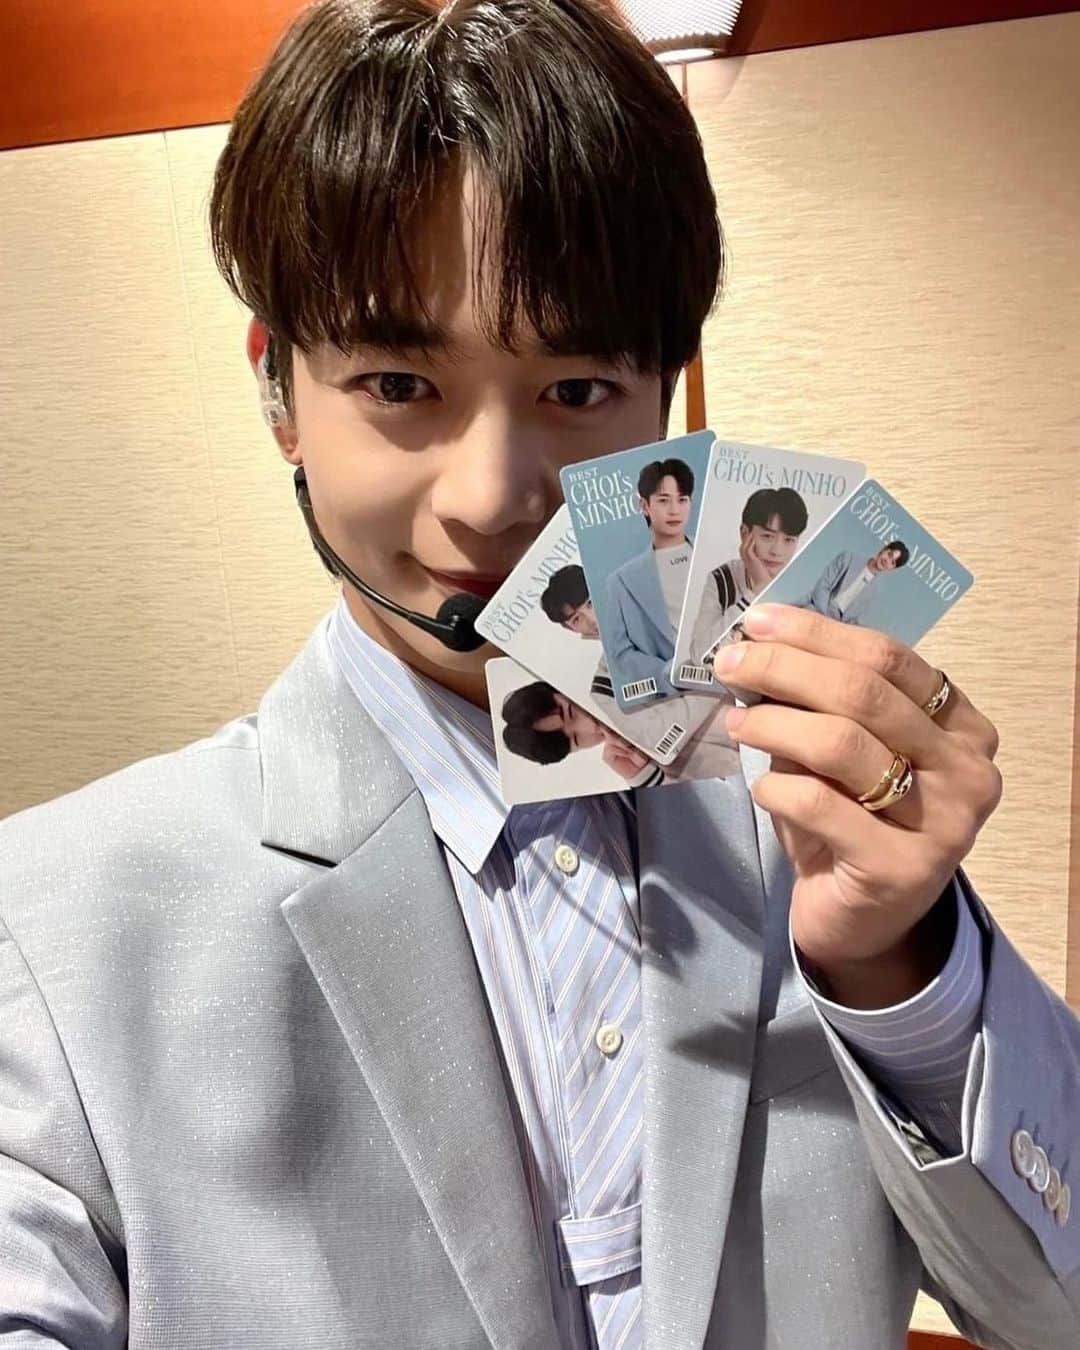 SHINeeのインスタグラム：「SHINee WORLD J Presents "BEST CHOI's MINHO" music card set sold at the UNIVERSAL MUSIC STORE 🎵 Please check it out as a raffle to win a minho direct autograph ✔️ 🔗Click here for the details https://t.co/VcrrsWxiPq https://t.co/AQhSHEzwyg Credit shinetter Editor Rose」